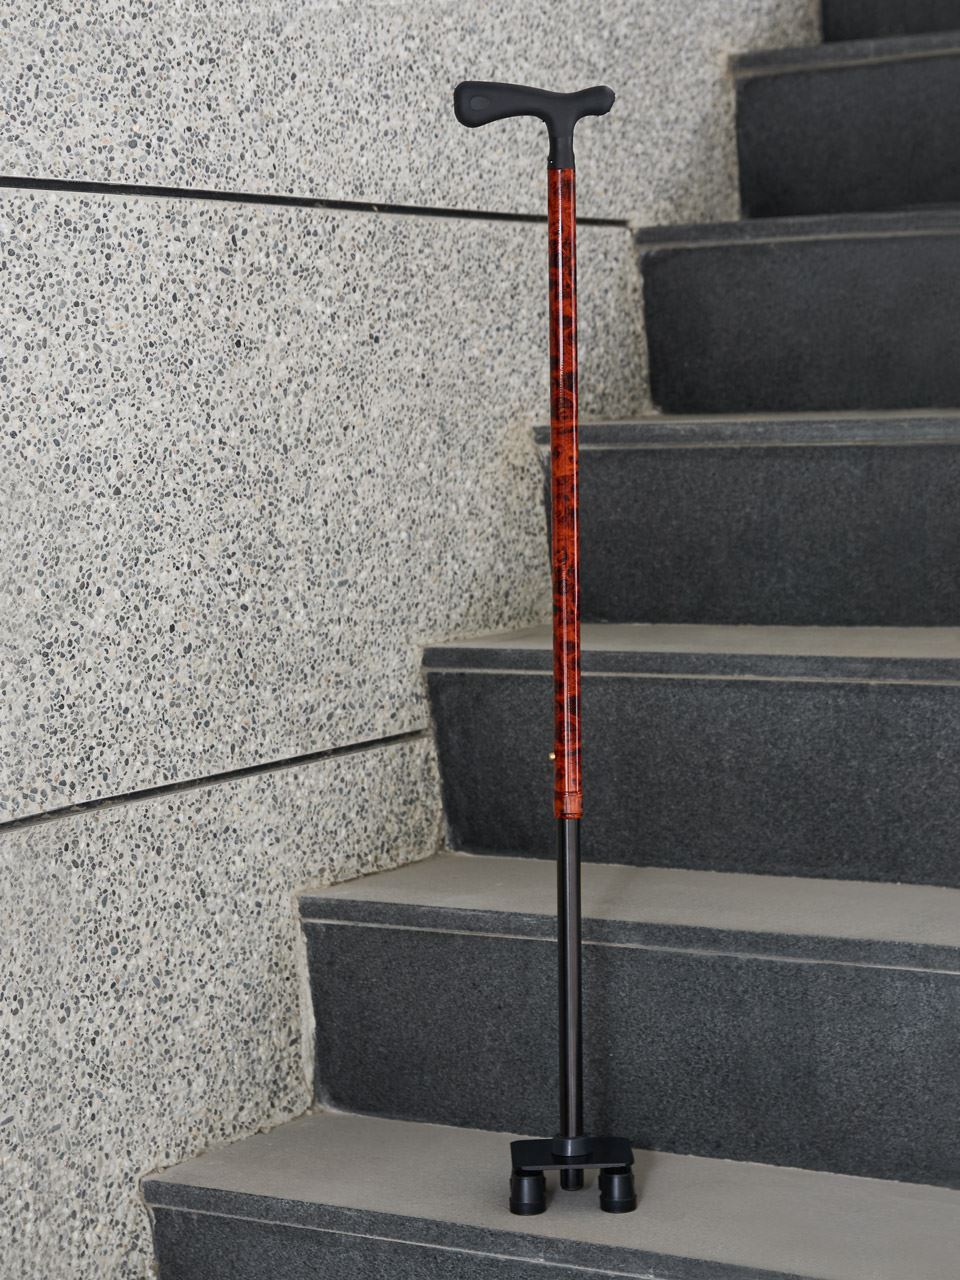 The mini quad cane makes travelling up and down steps a breeze​​​​​​​